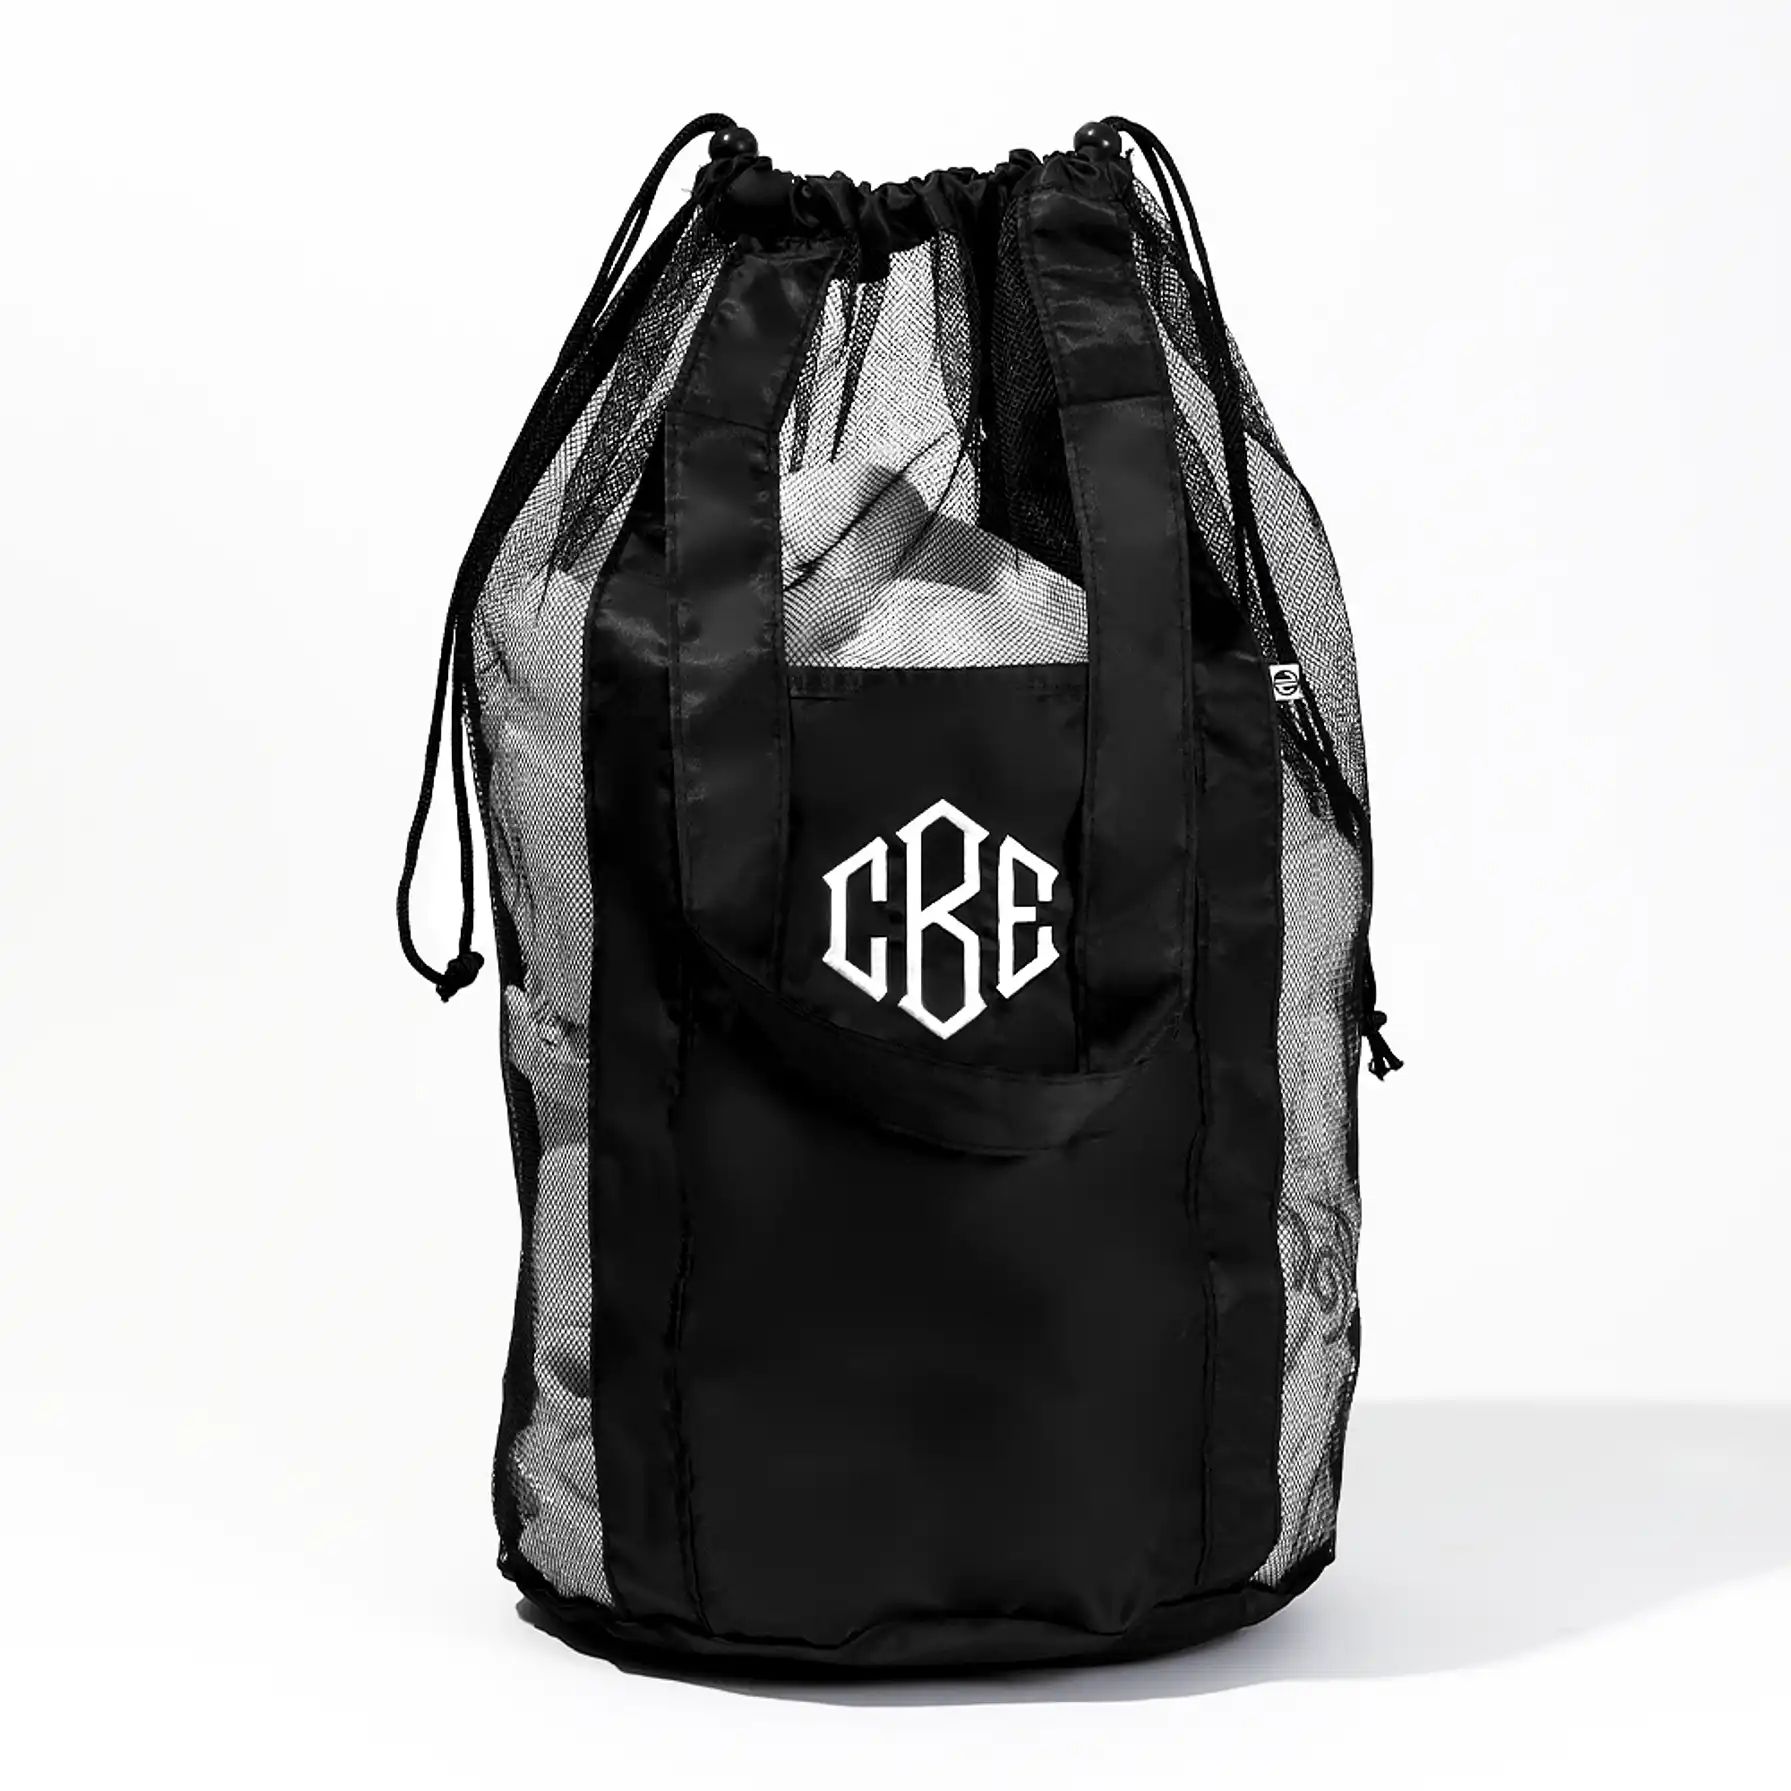 Monogrammed Packable Laundry Bag | Marleylilly